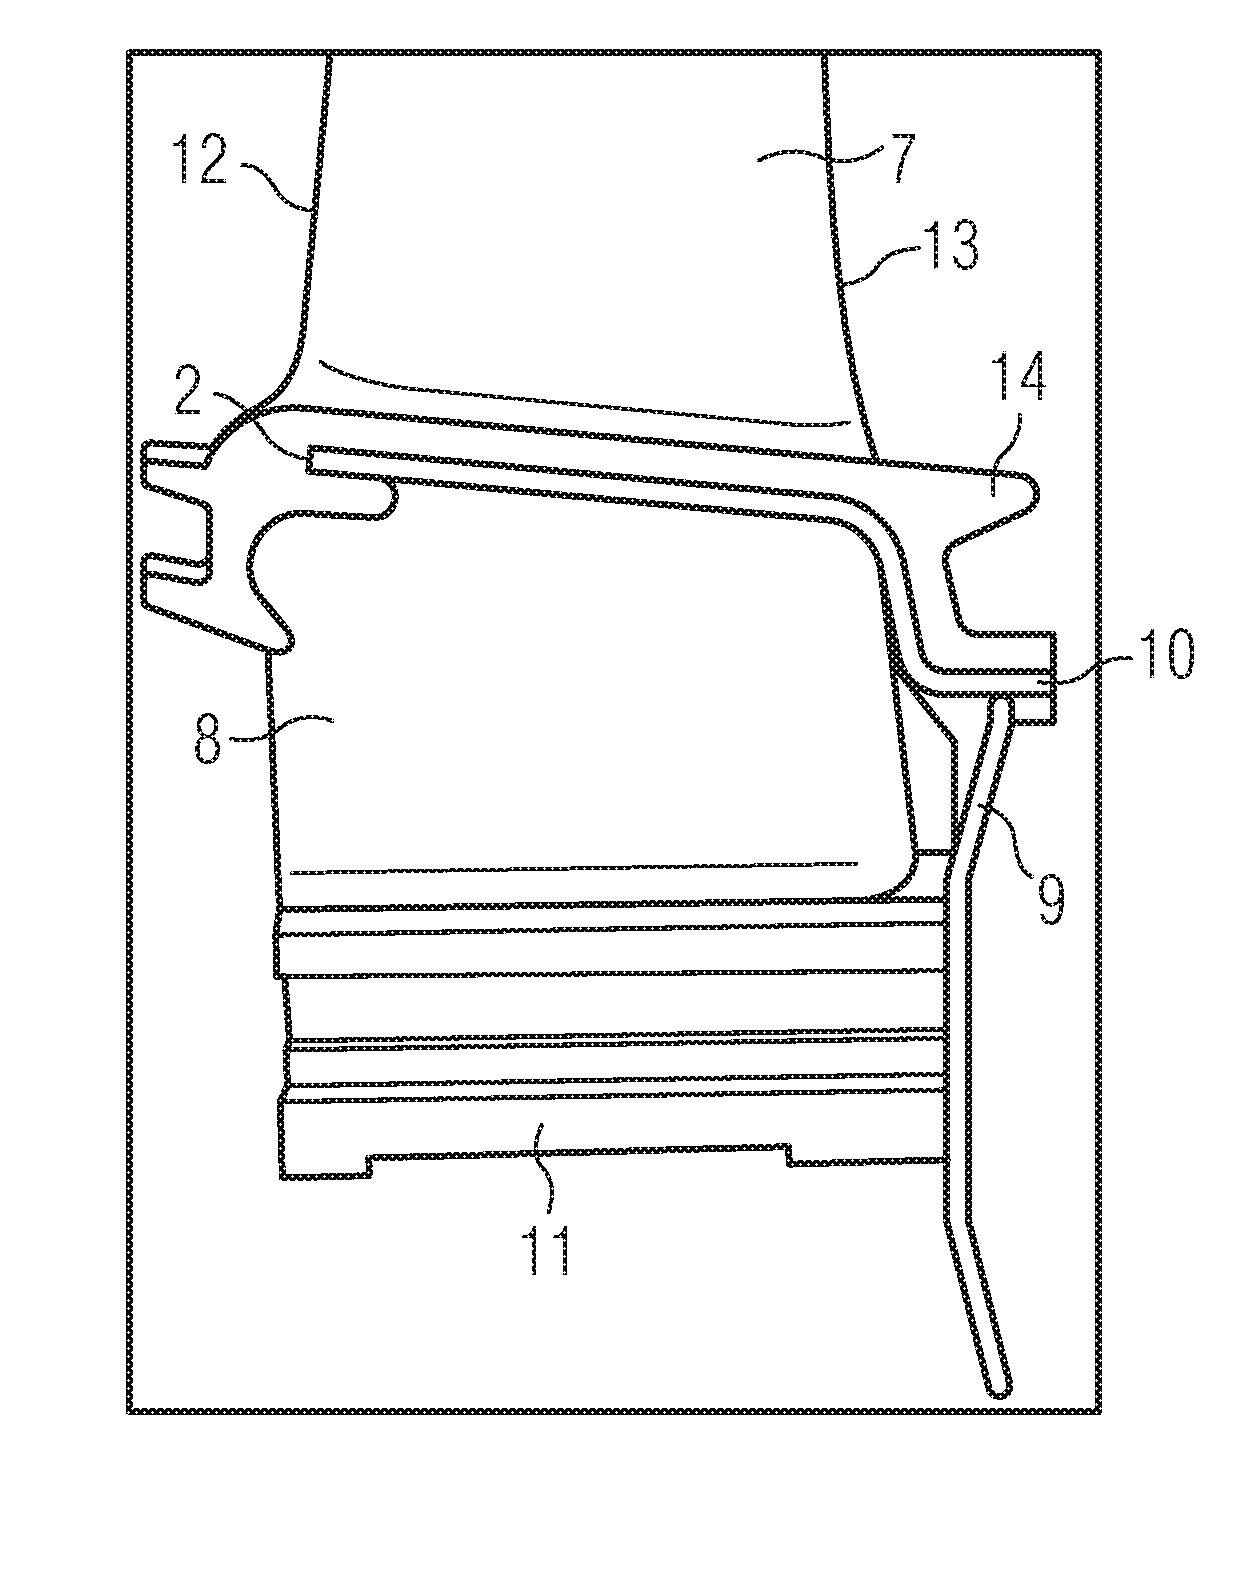 Turbine blade assembly and seal strip